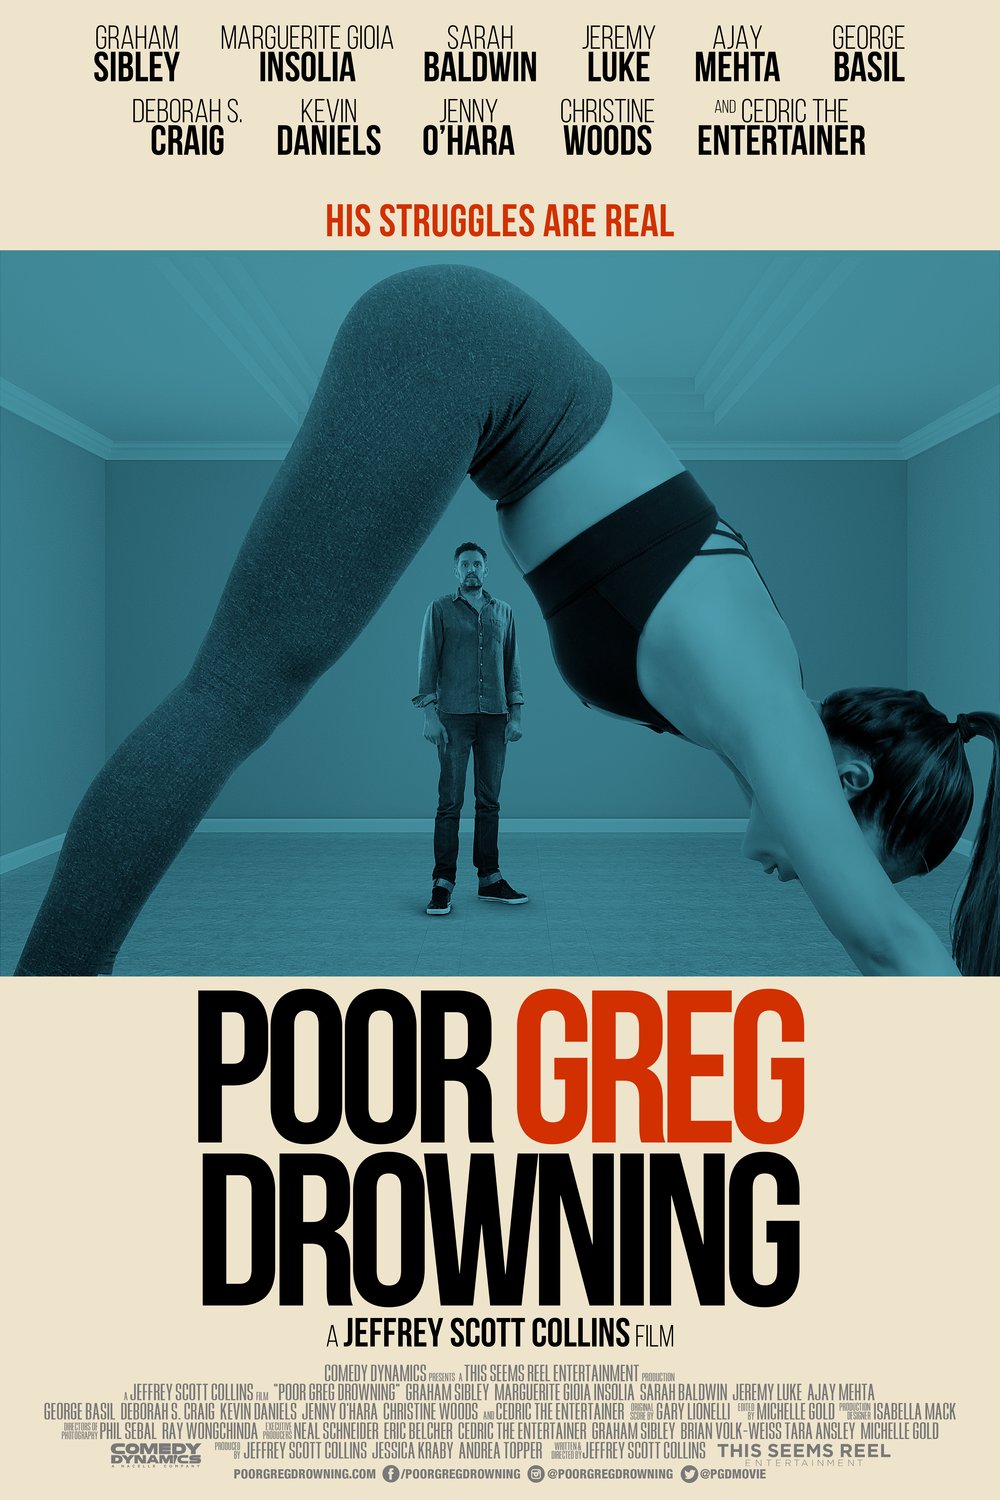 Poster of the movie Poor Greg Drowning